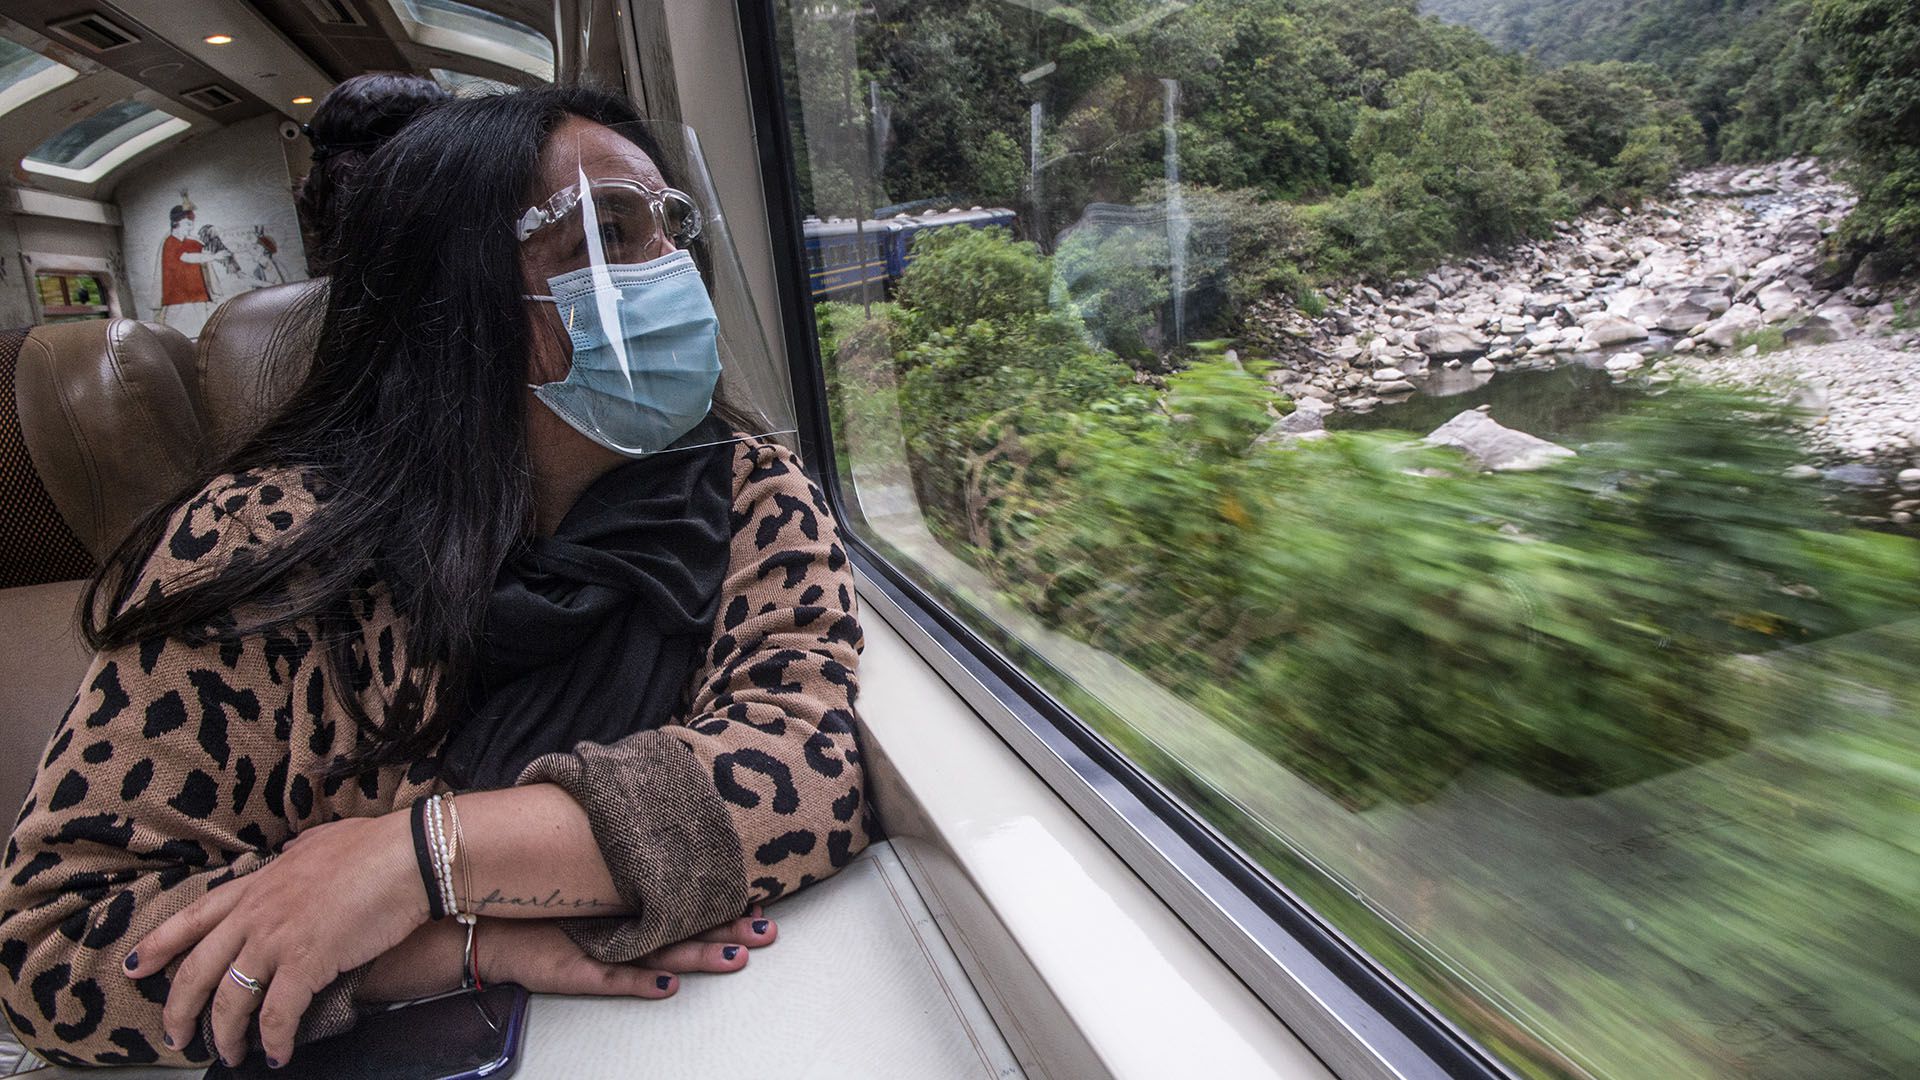 A visitor wearing face mask and shield looks out the train window on her way from Aguas Calientes to the archaeological site of Machu Picchu, in Cusco, Peru during its reopening on November 01, 2020, amid the new coronavirus pandemic. - The Inca citadel of Machu Picchu reopened on Sunday in the framework of a gradual decrease in COVID-19 contagions in Peru, after remaining empty almost eight months, affecting the tourism sector severely. (Photo by ERNESTO BENAVIDES / AFP)